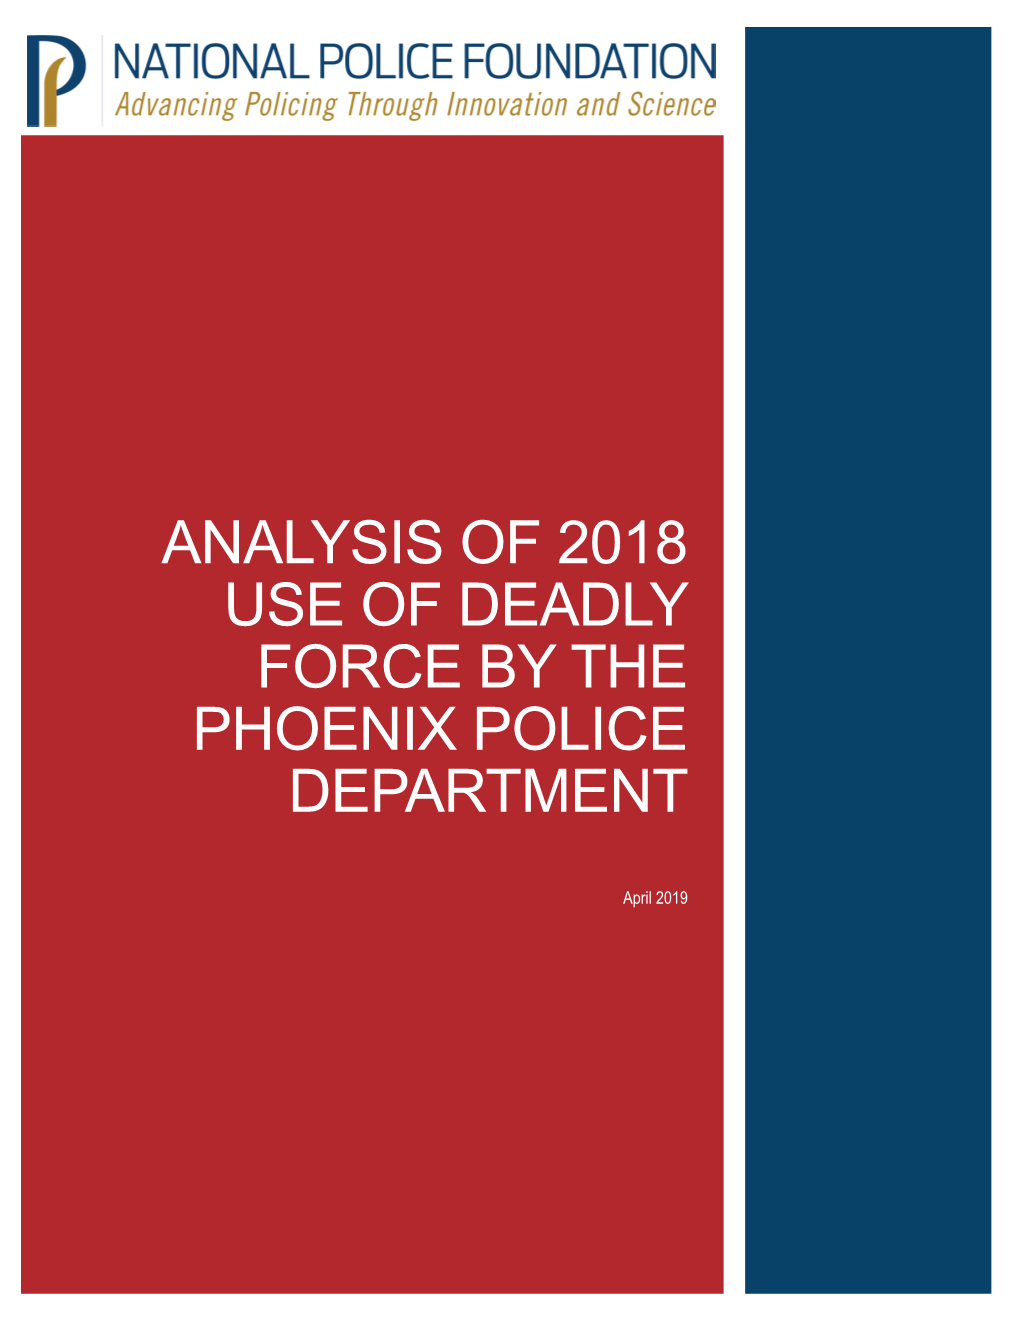 Analysis of 2018 Use of Deadly Force by the Phoenix Police Department